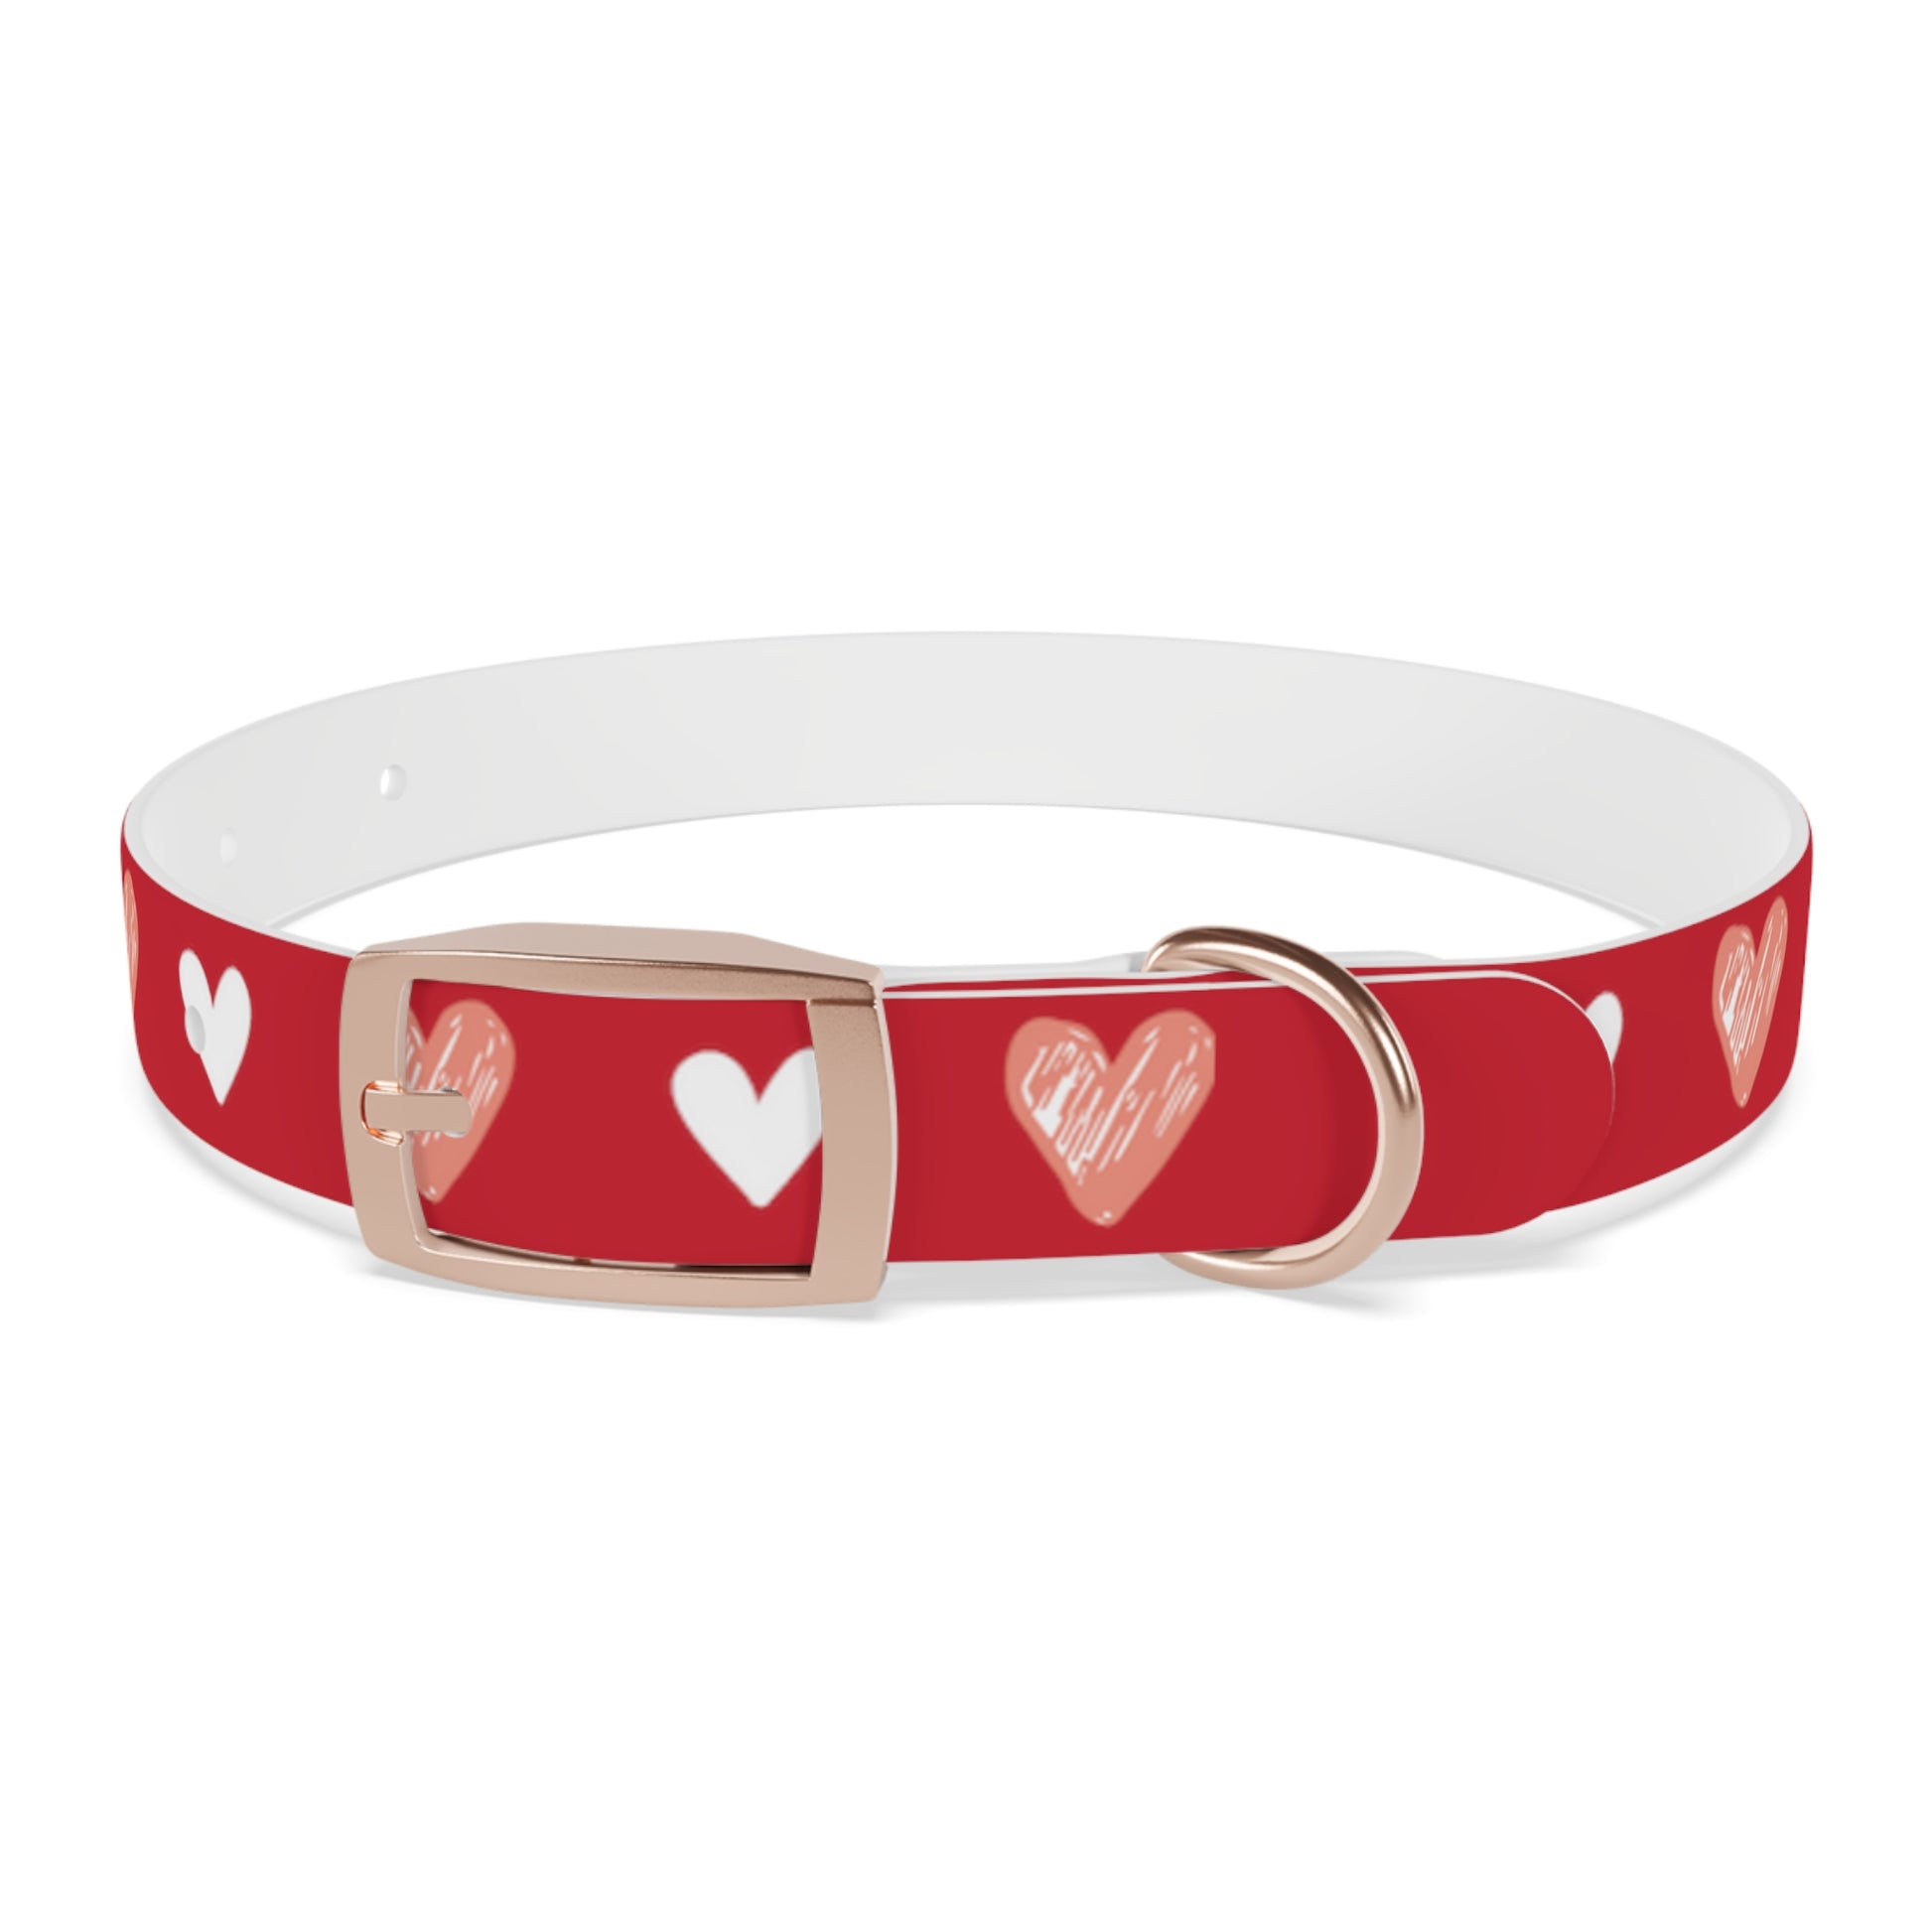 front of a dog collar with a beautiful hearts pattern design and the dog's name in the middle of the collar. The color of the dog collar is red